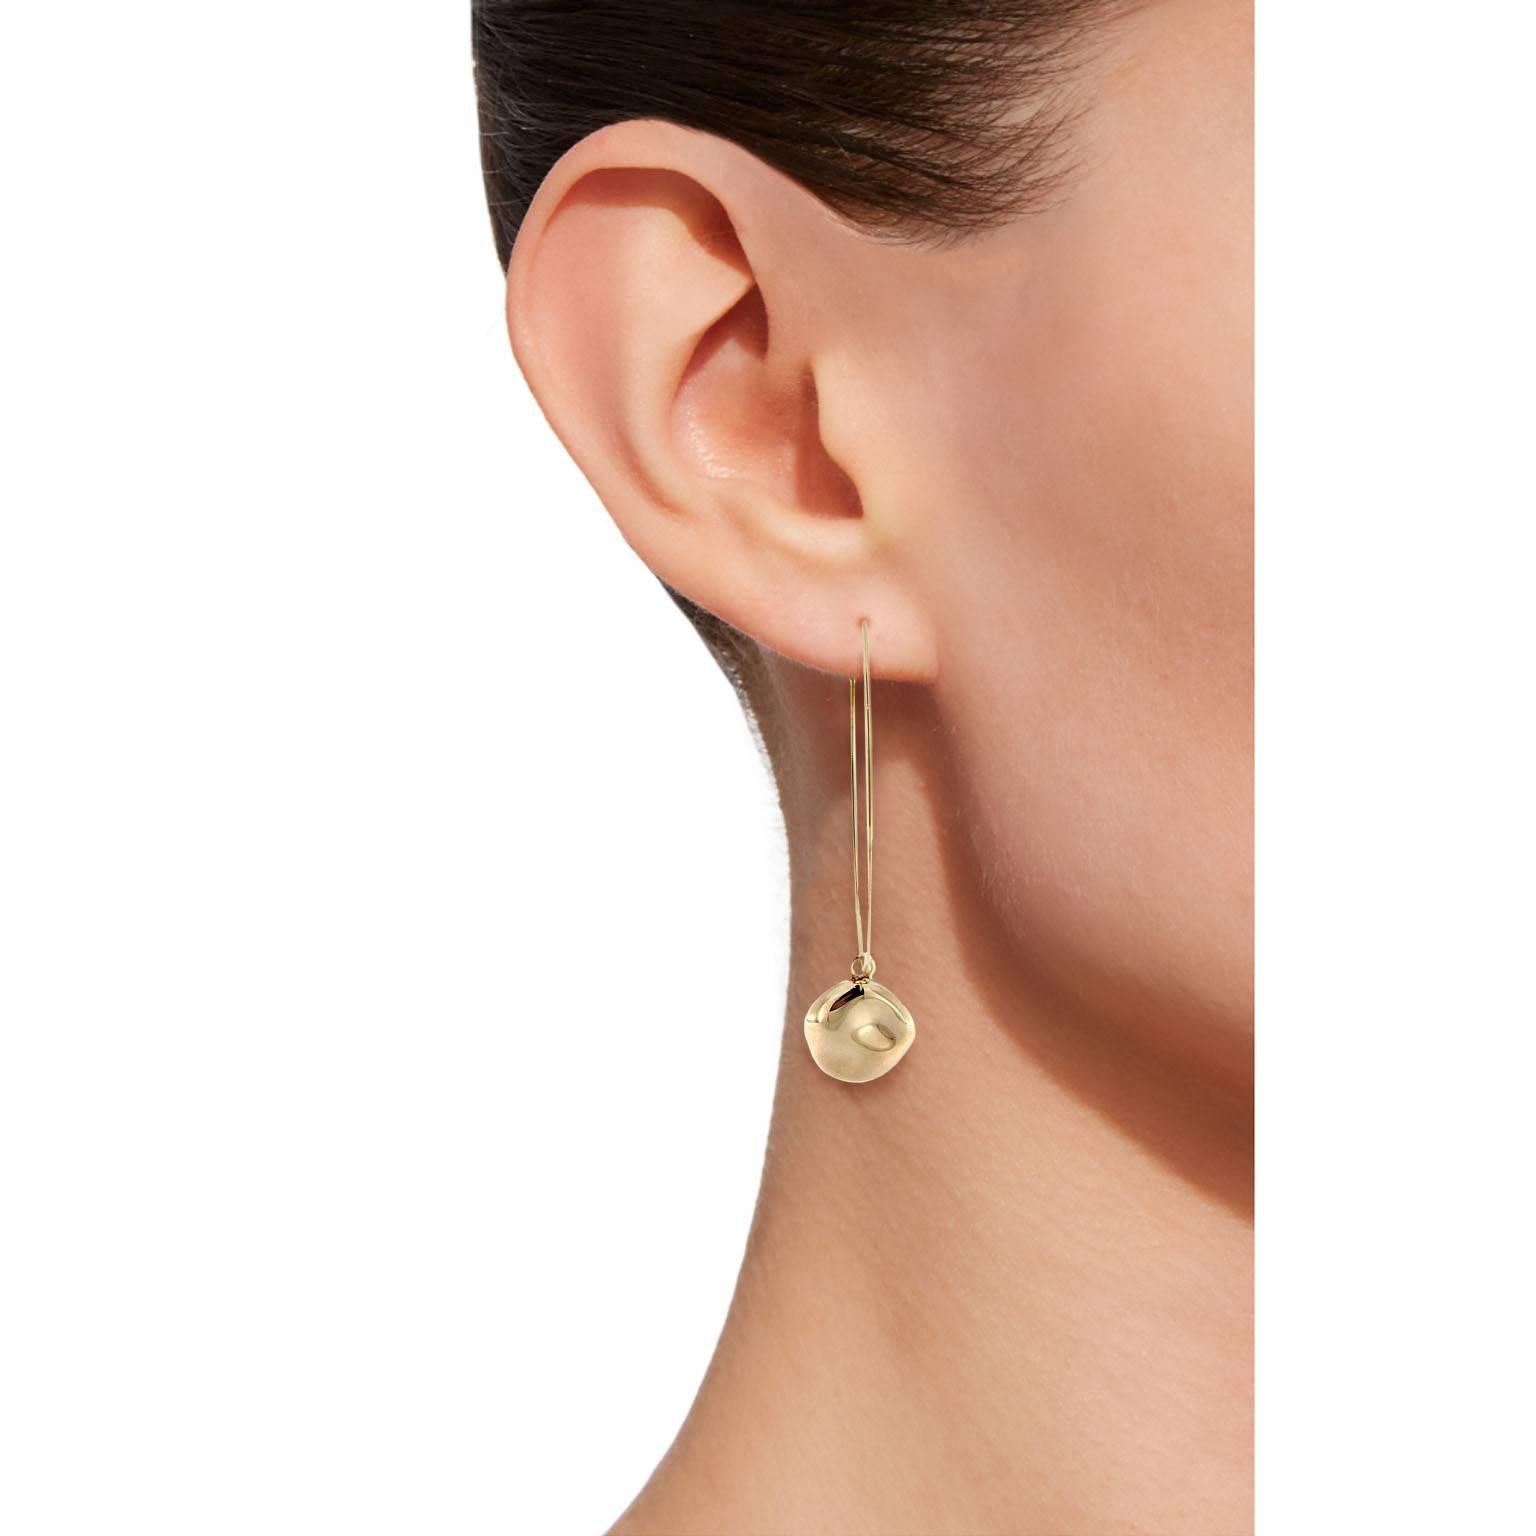 Jona design collection, hand crafted in Italy, 18 karat yellow gold flexible hoop earrings with a sliding gold pebble pendant.

All Jona jewelry is new and has never been previously owned or worn. Each item will arrive at your door beautifully